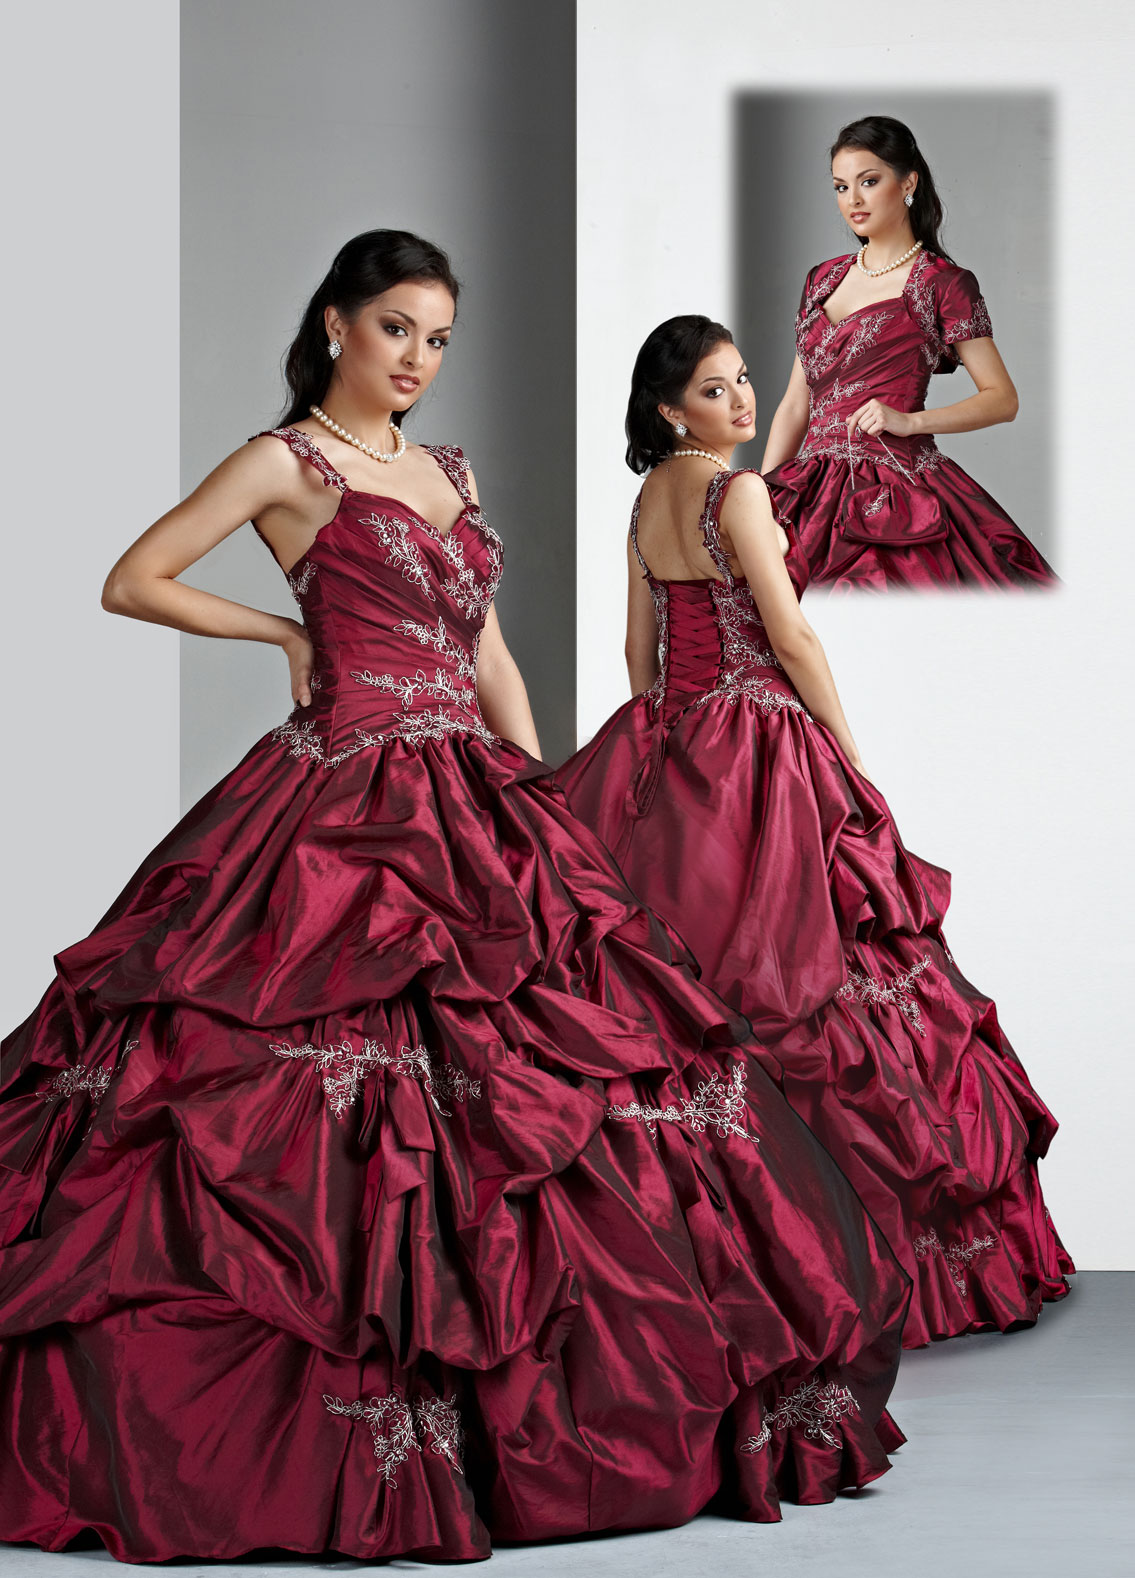 Strap And Sweetheart Lace Up Floor Length Burgundy Ball Gown Quinceanera Dresses With Embroidery And Ruffles 